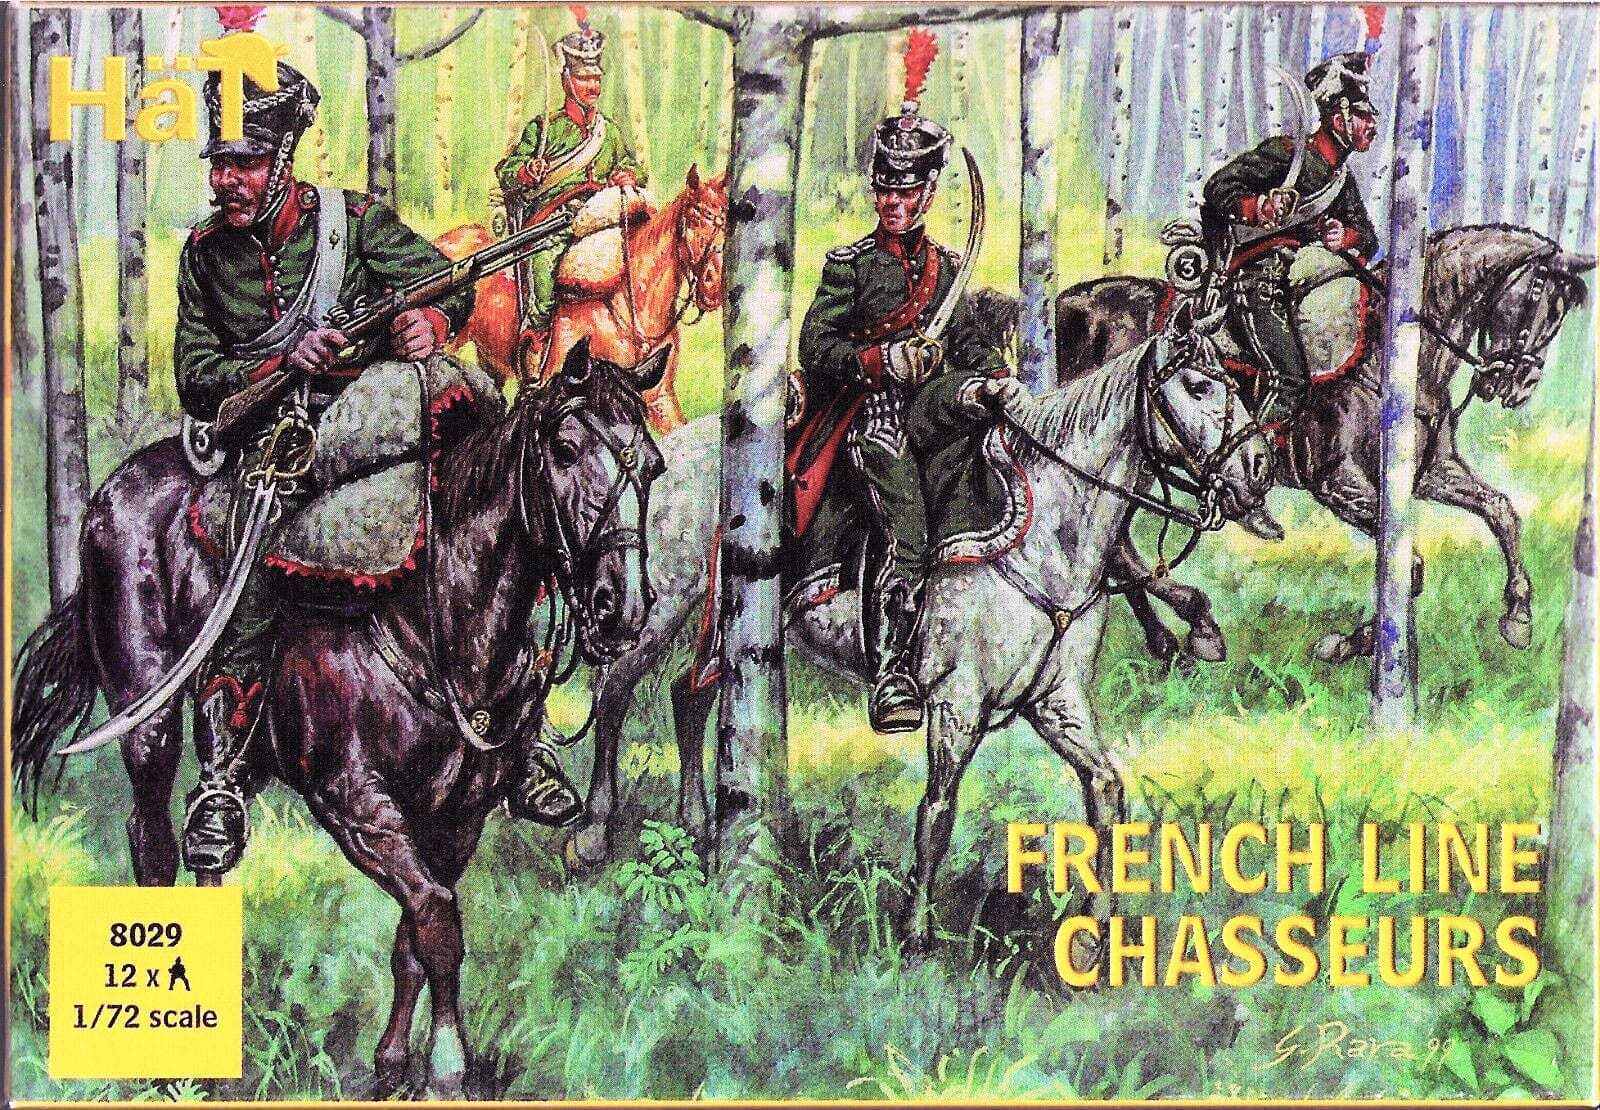 HaT Miniatures 1/72 FRENCH LINE CHASSEURS Figure Set